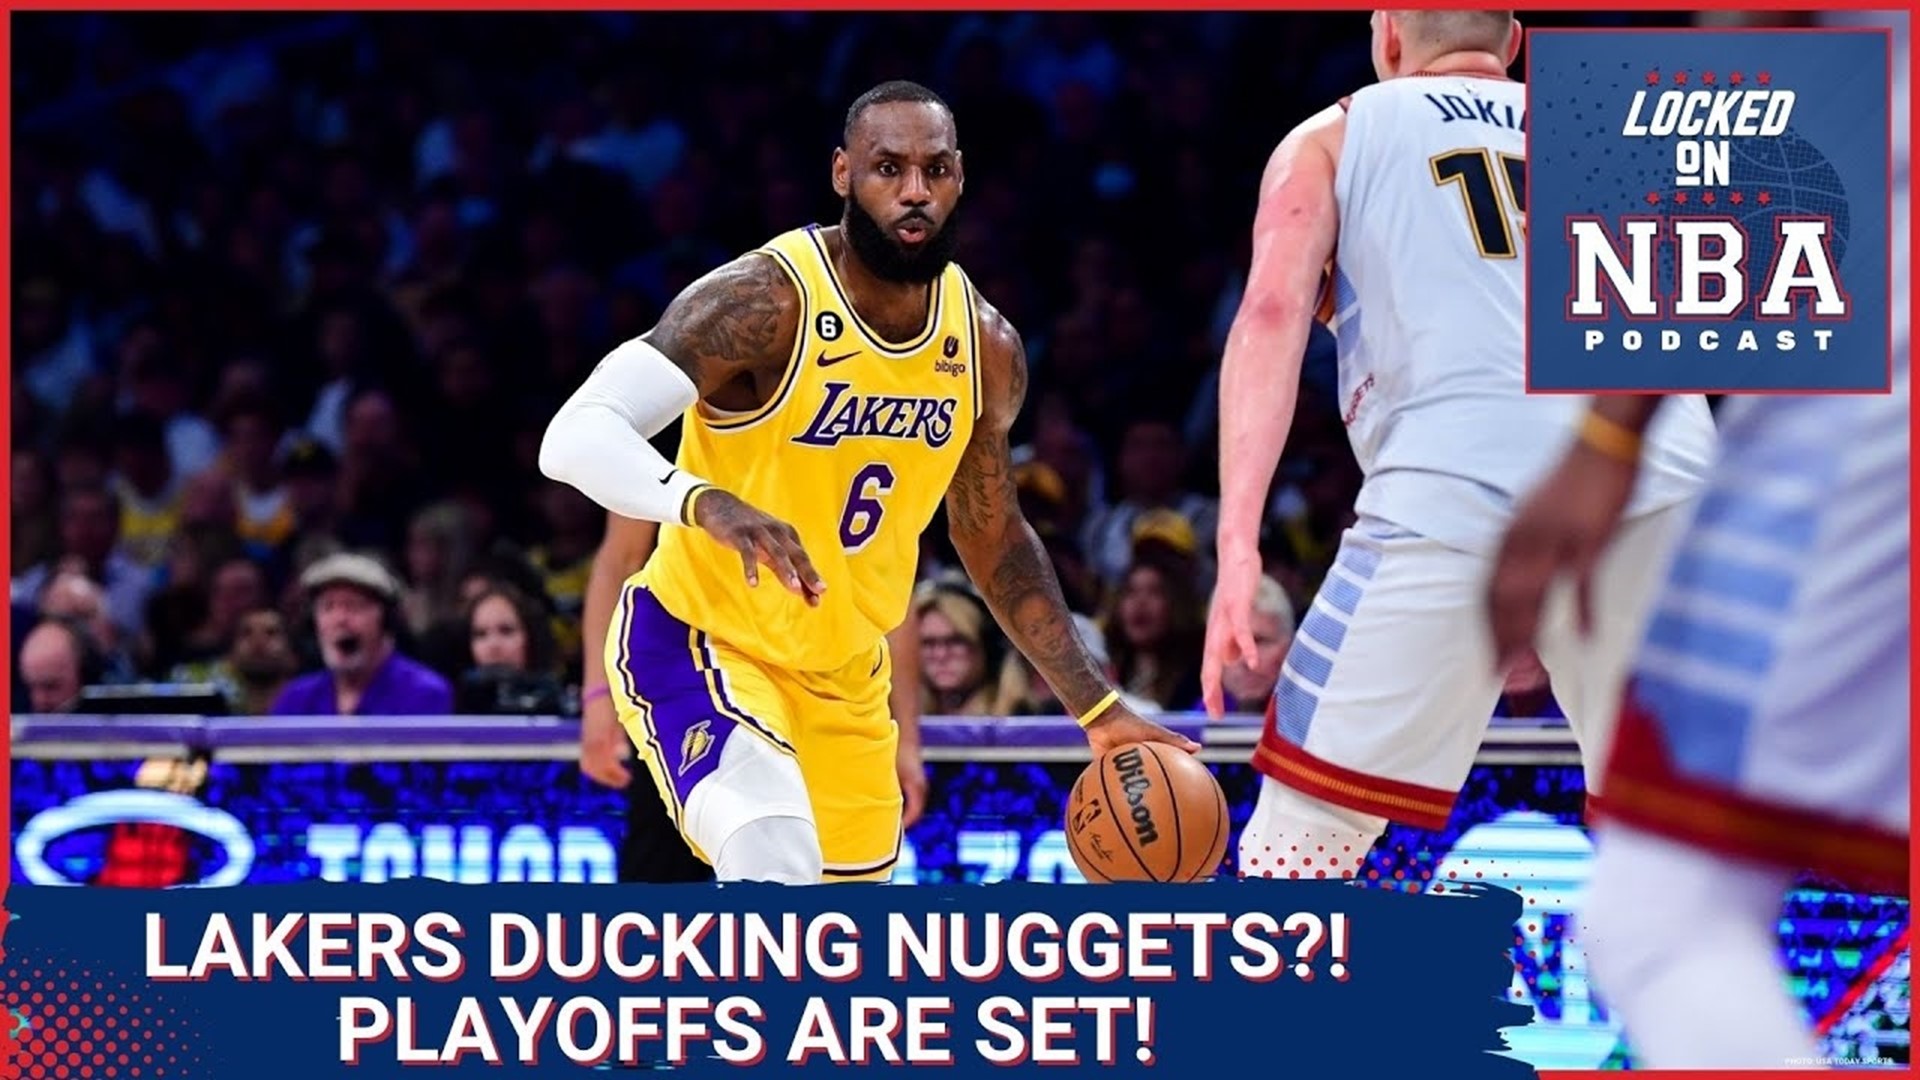 David Ramil and Matt Moore break down the NBA playoff bracket, whether the Lakers should tank their play-in game and more.